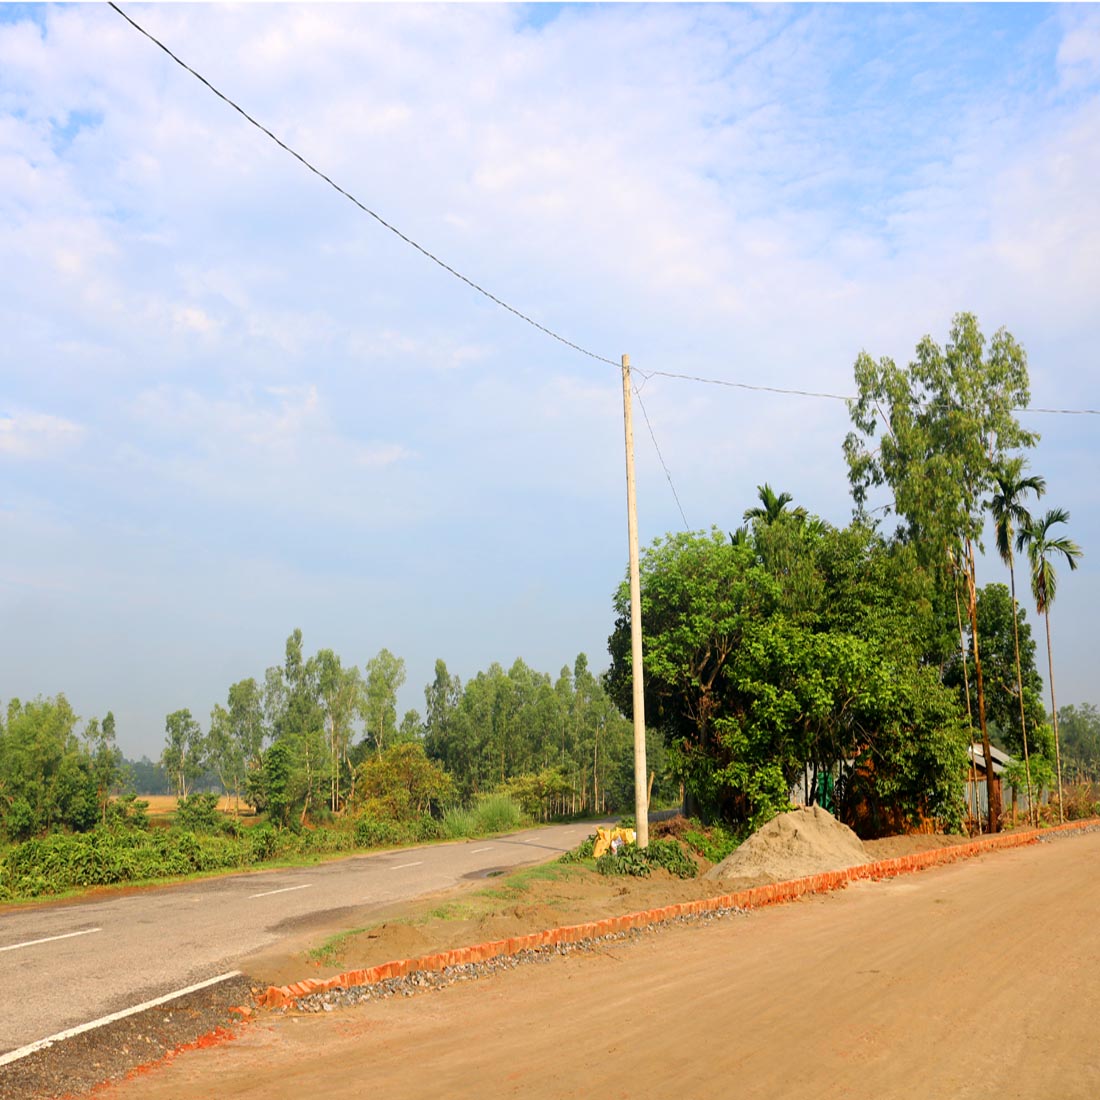 Ghar Tree village people & roads stock photos in Bangladesh preview image.